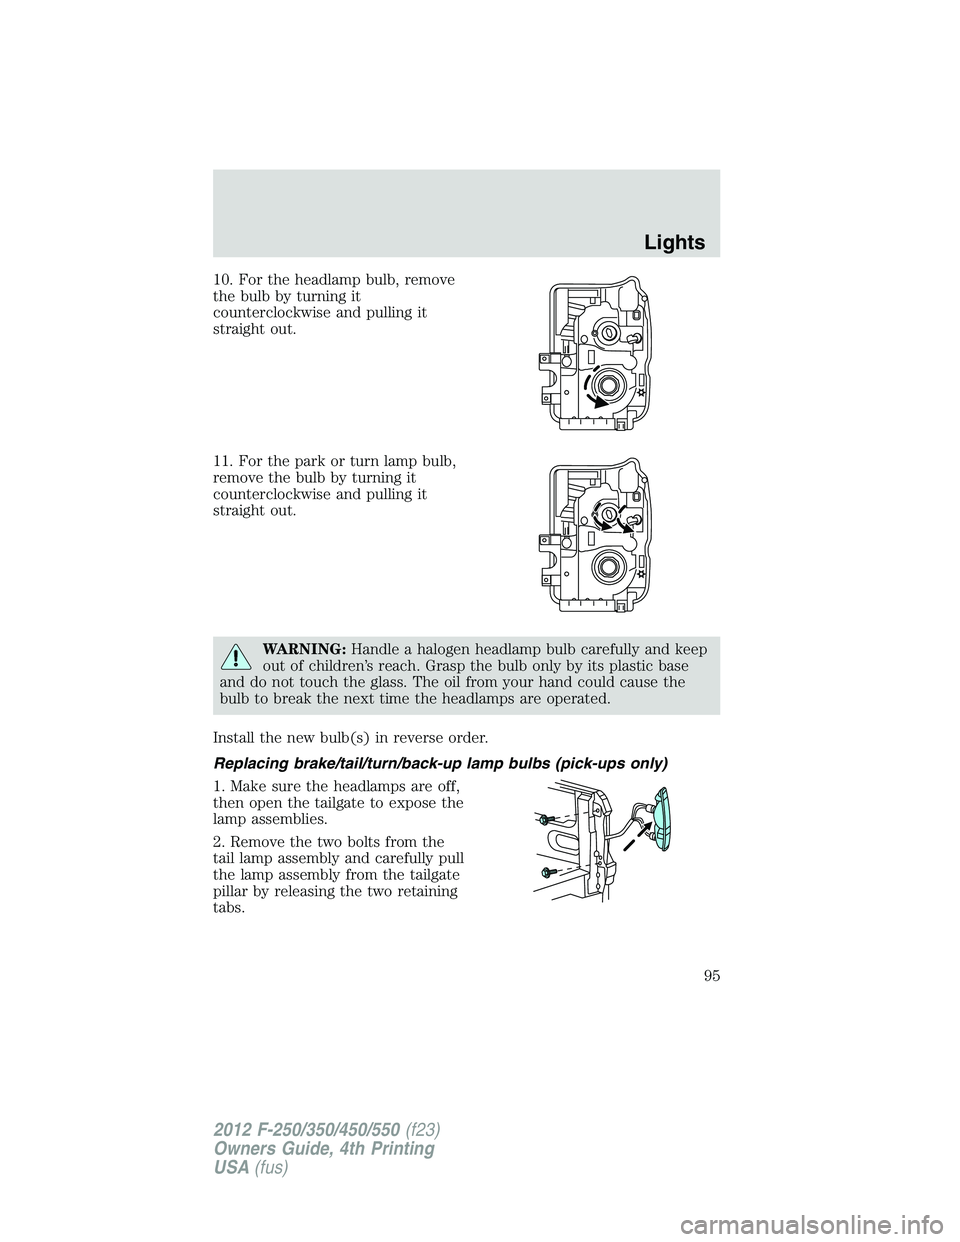 FORD F250 SUPER DUTY 2012  Owners Manual 10. For the headlamp bulb, remove
the bulb by turning it
counterclockwise and pulling it
straight out.
11. For the park or turn lamp bulb,
remove the bulb by turning it
counterclockwise and pulling it